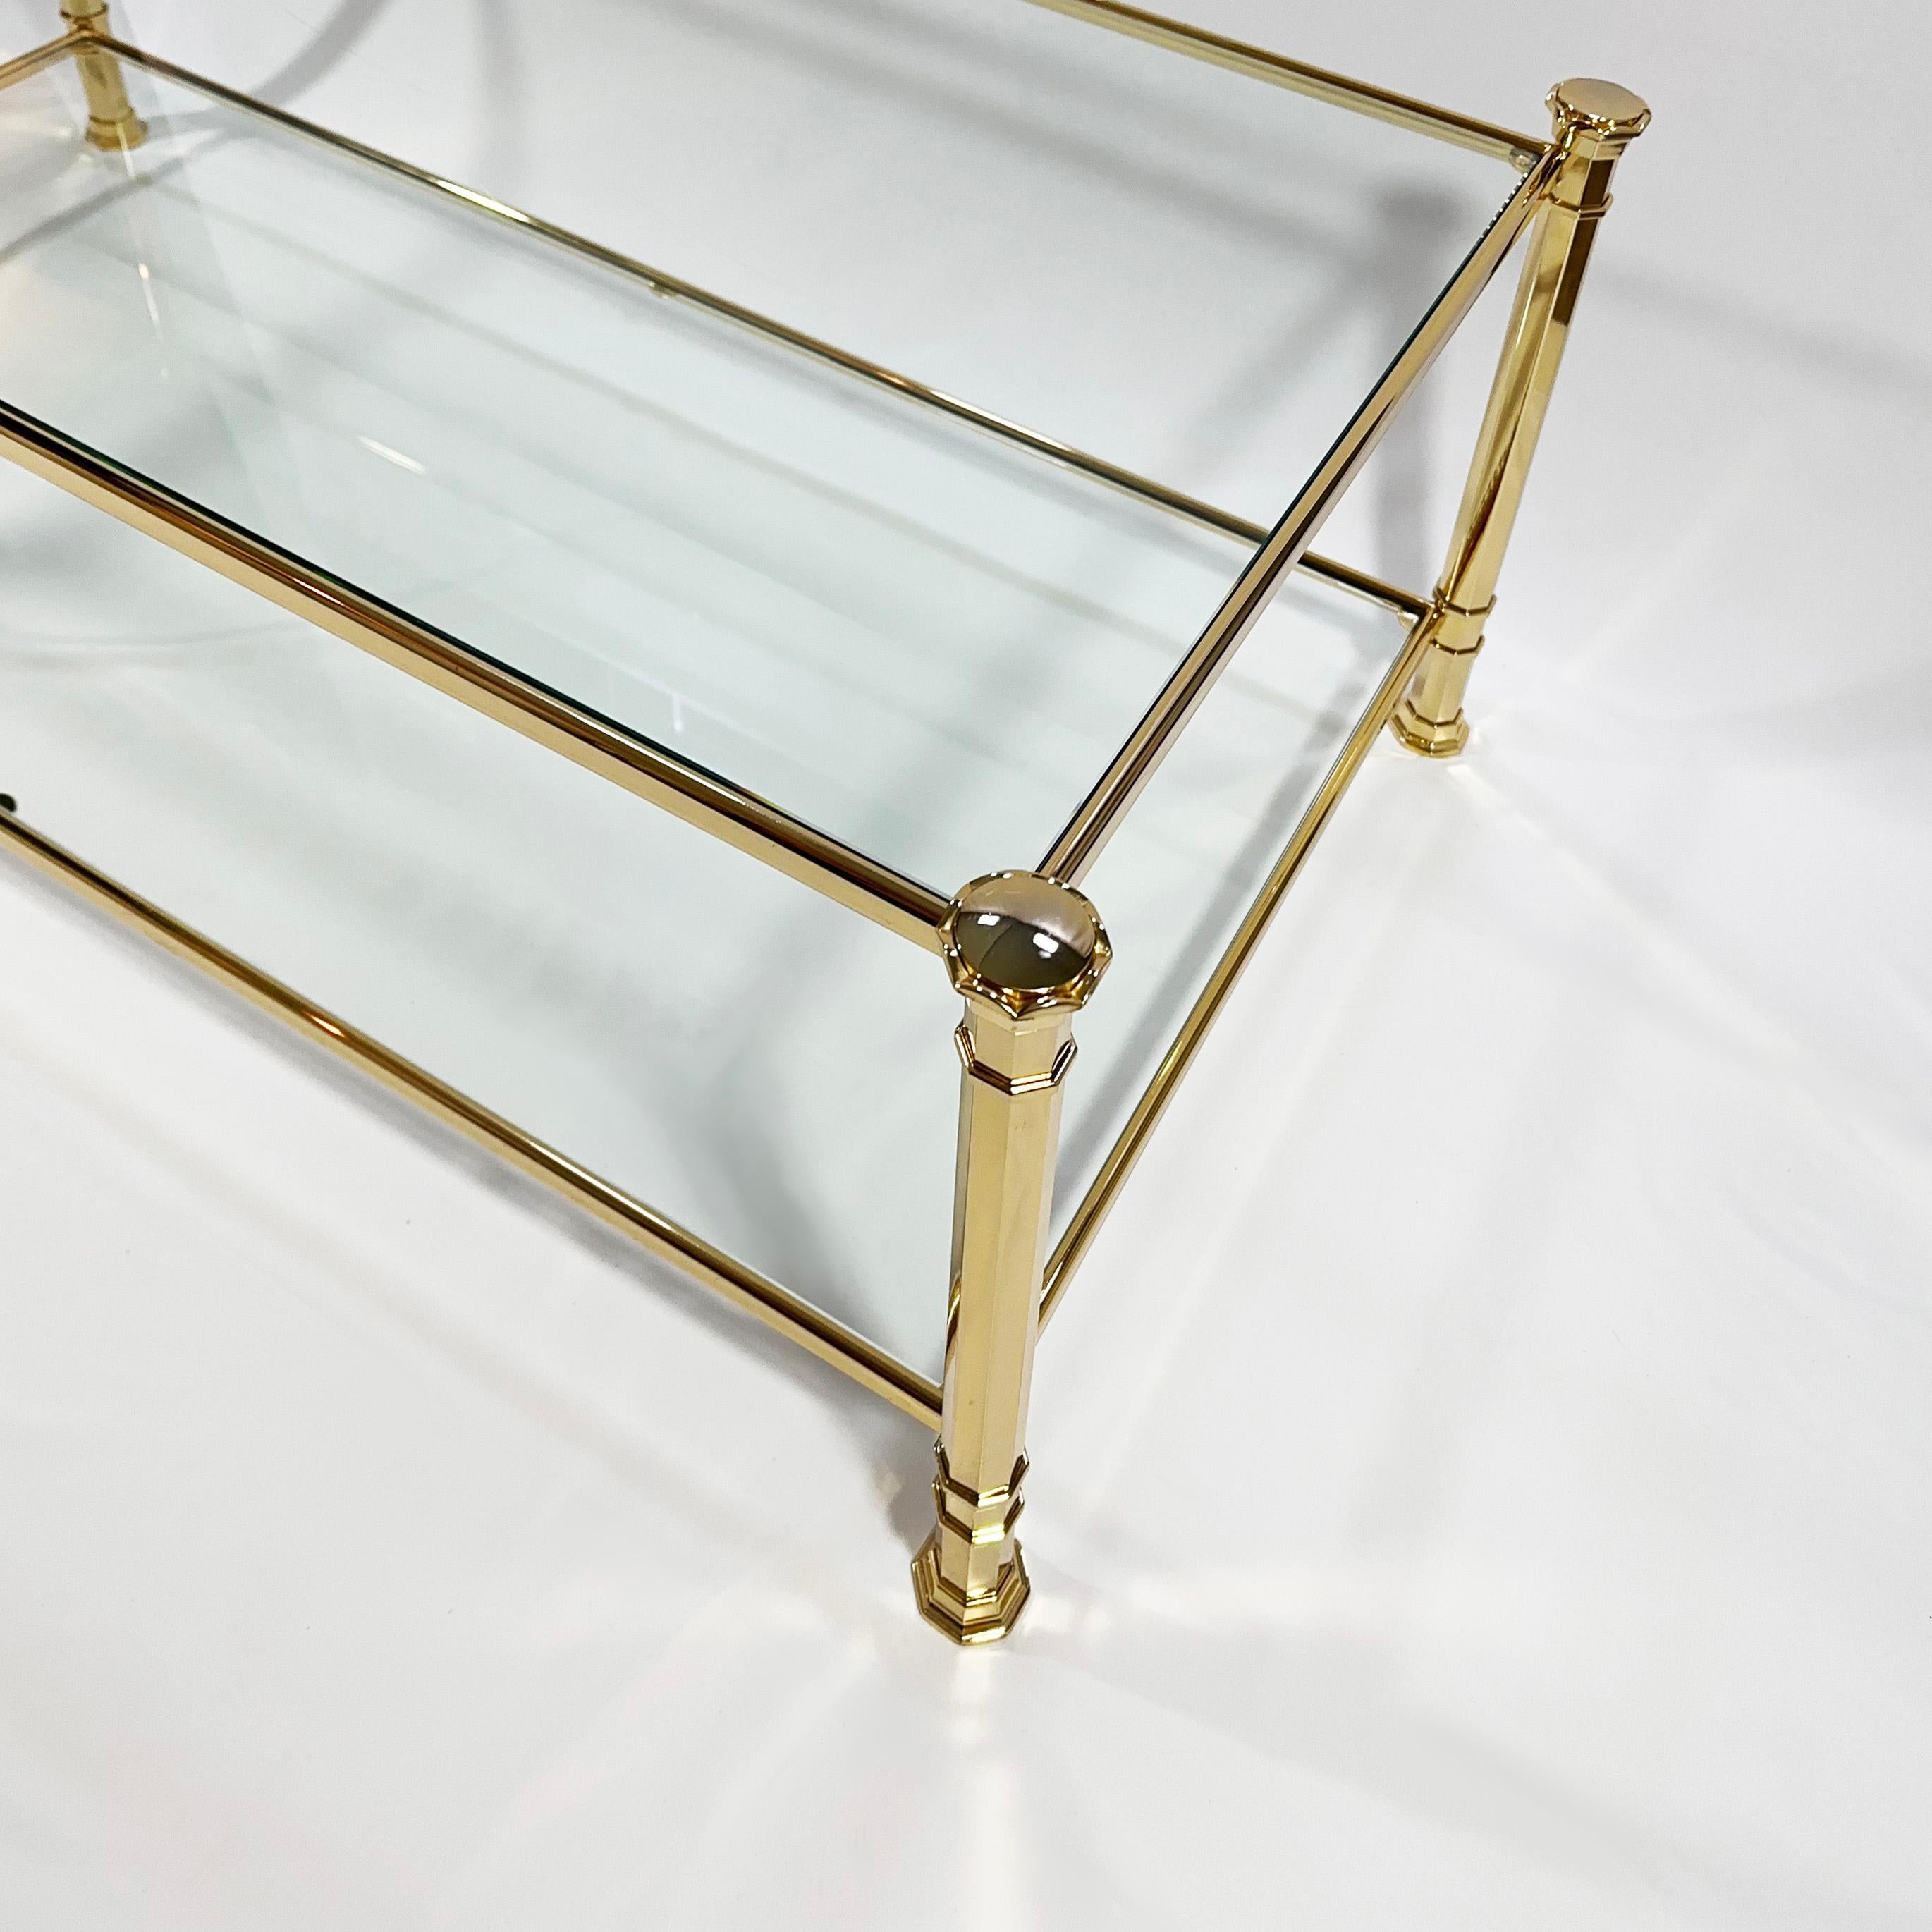 Discover the epitome of 1970s chic with this French neoclassical coffee table, a harmonious blend of sturdiness and grace. The octagonal, pillar-like legs and slender brass frame reveal its neoclassical-style design elements, supporting two tiers of